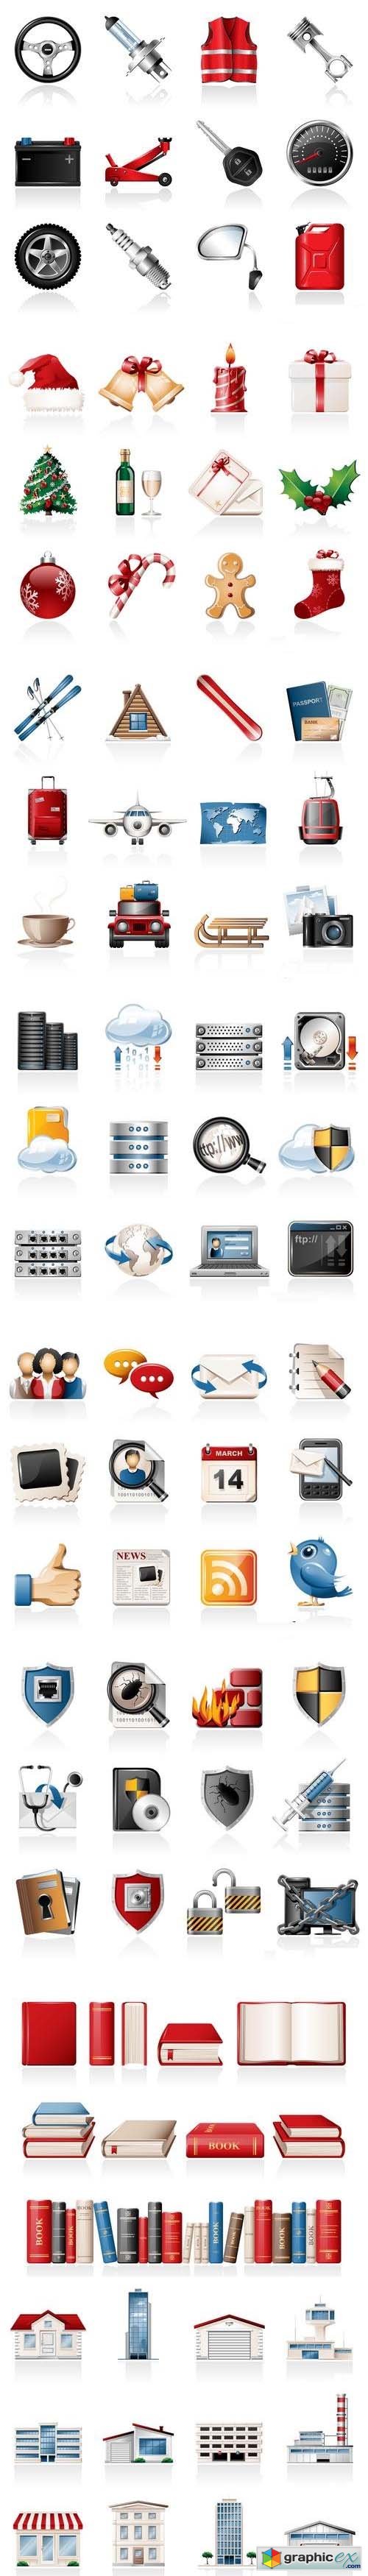 Stock Vector - Icons MIX 2